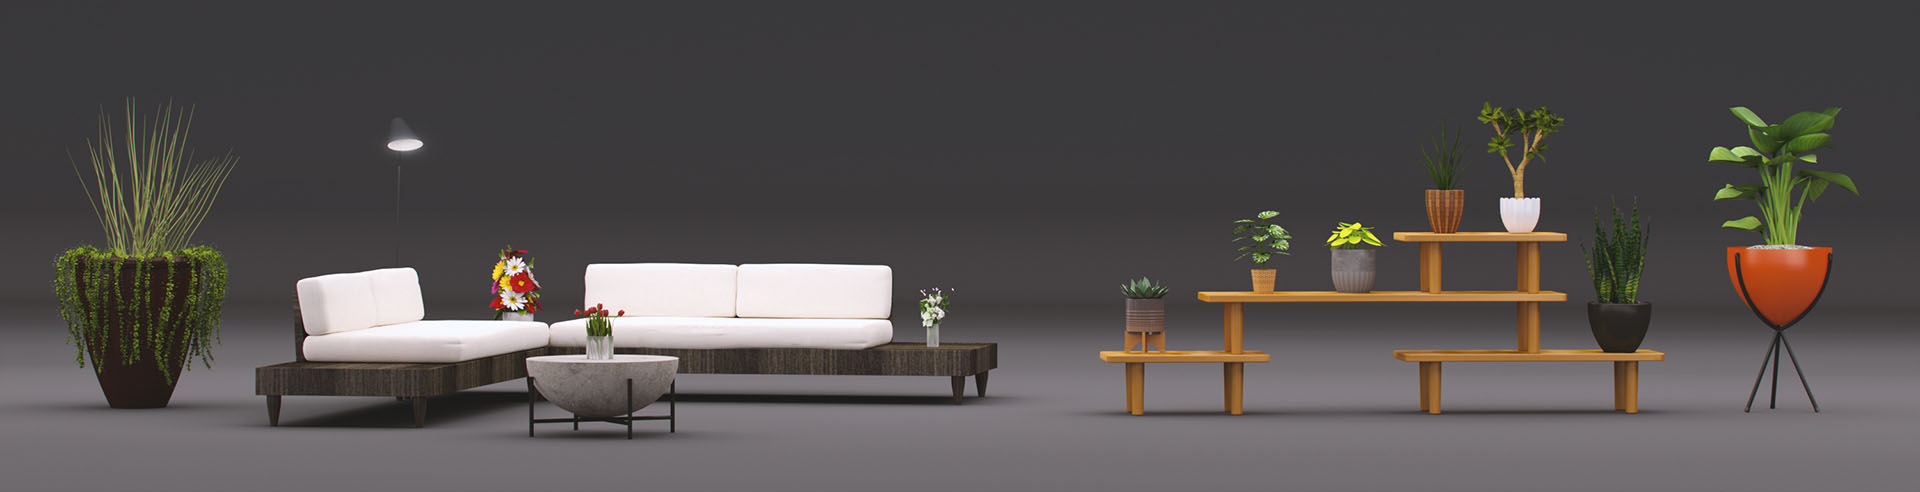 Render-ready furniture and plants from Podium Browser